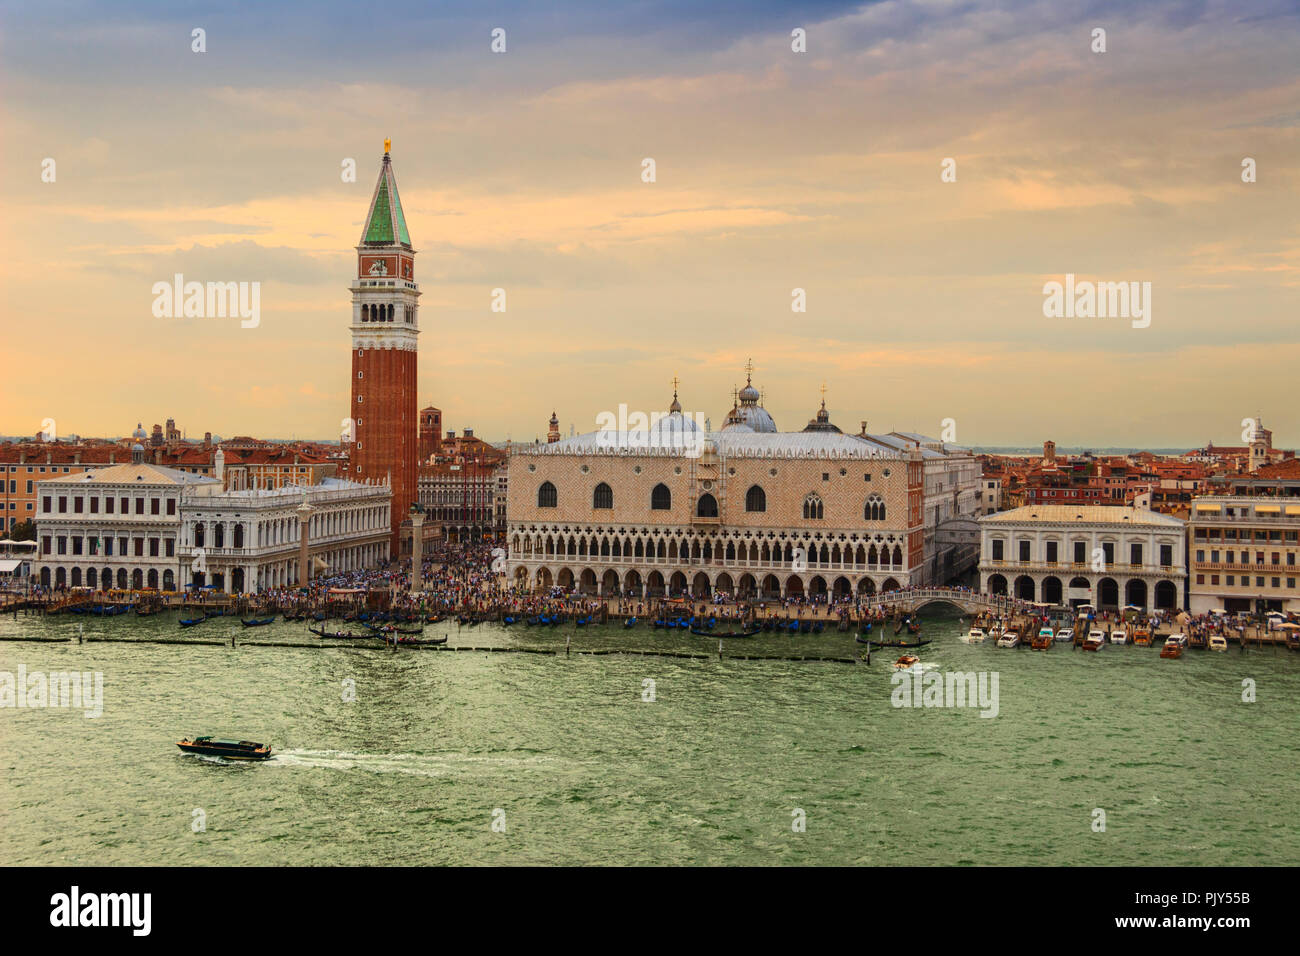 Saint Mark's Square in Venice, Italy aerial view of Piazza San Marco (Saint Mark's Square), Campanile  (Bell Tower) and Palazzo Ducale (Doge's Palace). Stock Photo